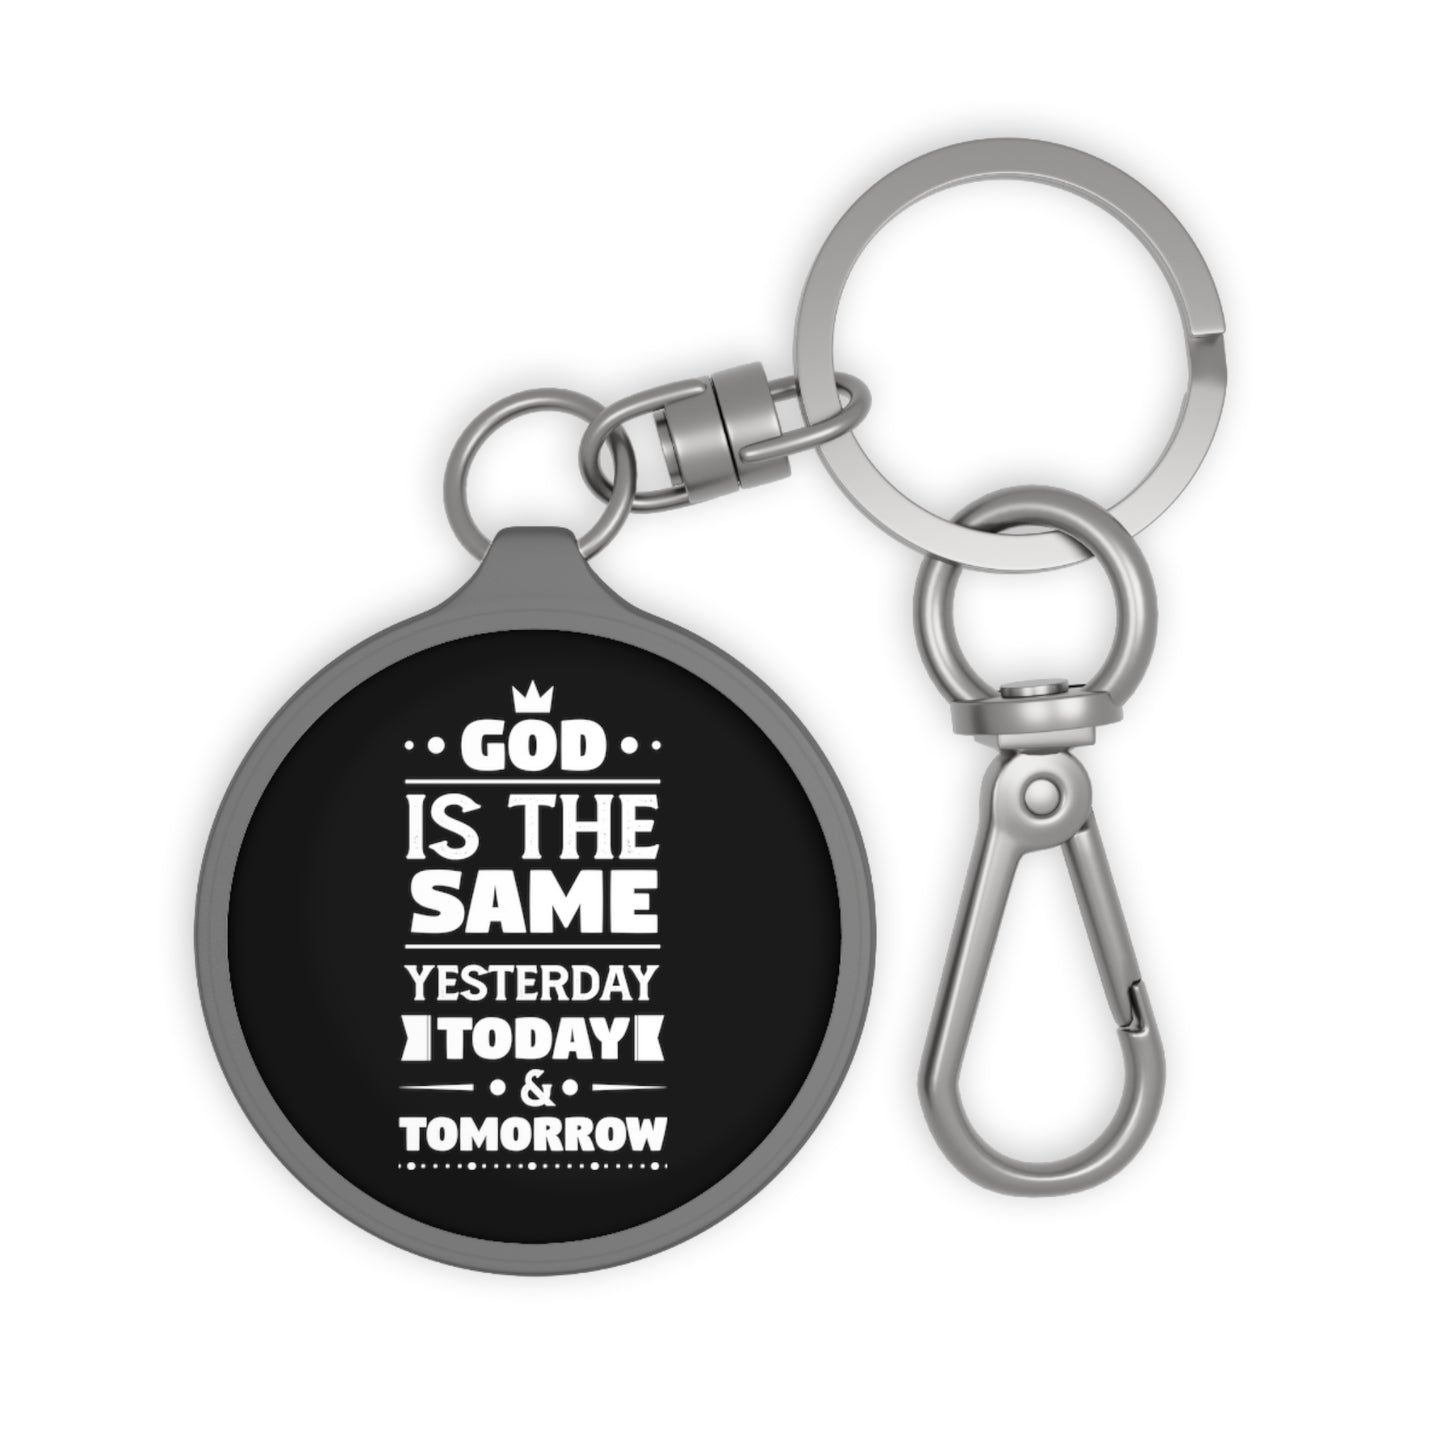 God Is The Same Yesterday Today & Tomorrow Key Fob